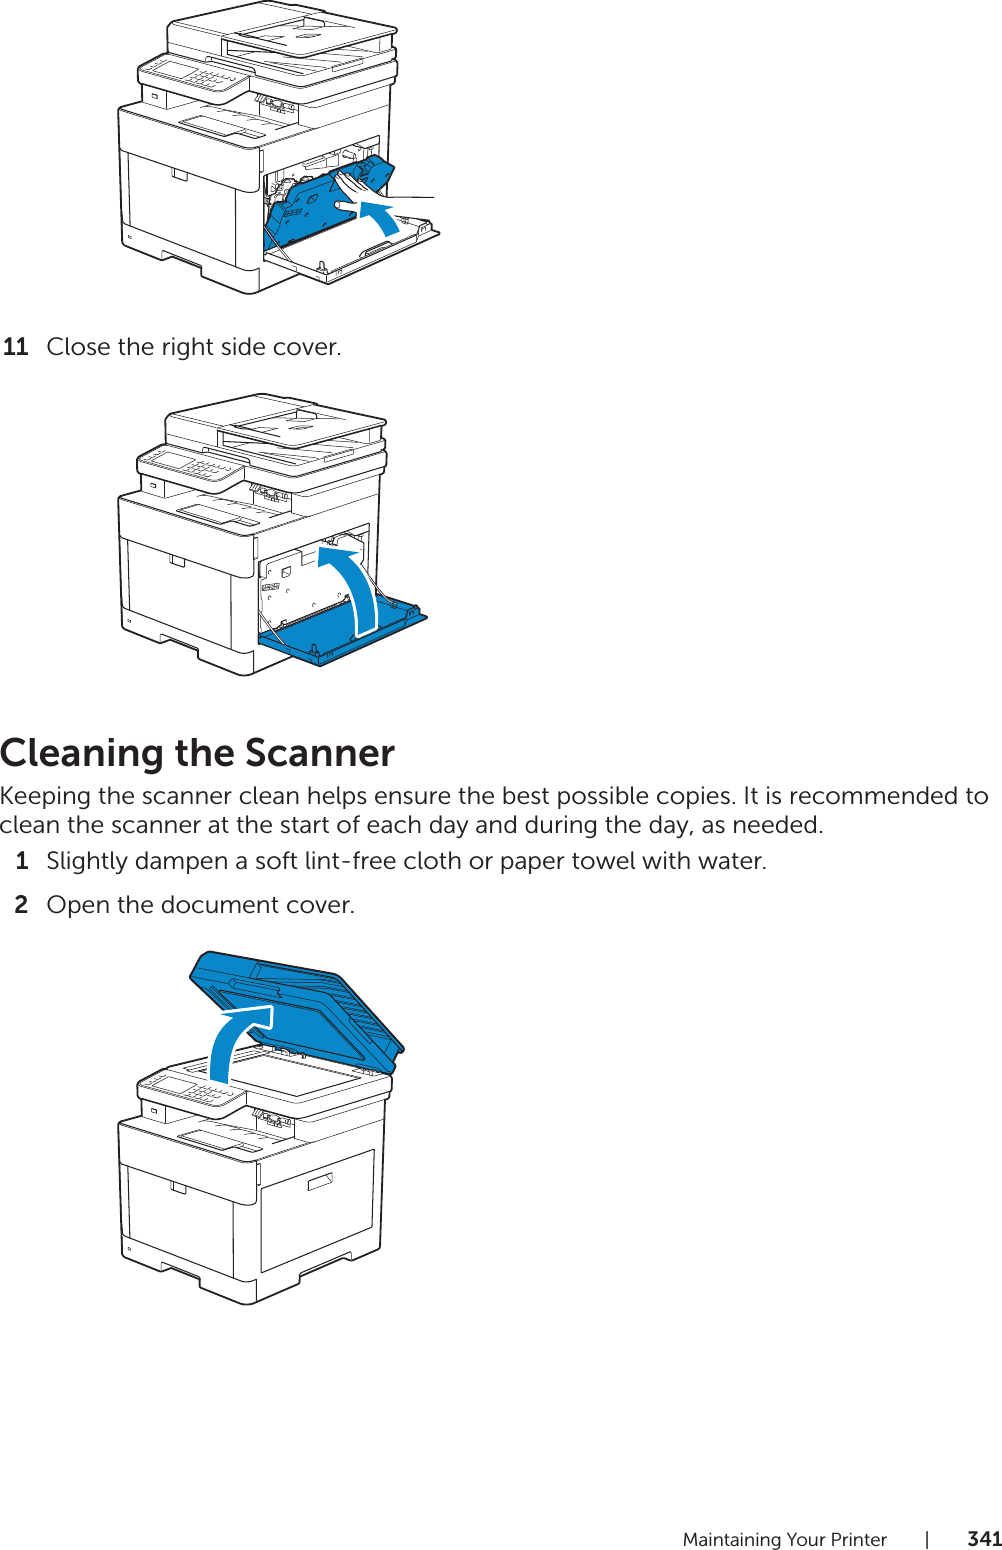 Maintaining Your Printer |34111 Close the right side cover.Cleaning the ScannerKeeping the scanner clean helps ensure the best possible copies. It is recommended to clean the scanner at the start of each day and during the day, as needed.1Slightly dampen a soft lint-free cloth or paper towel with water.2Open the document cover.